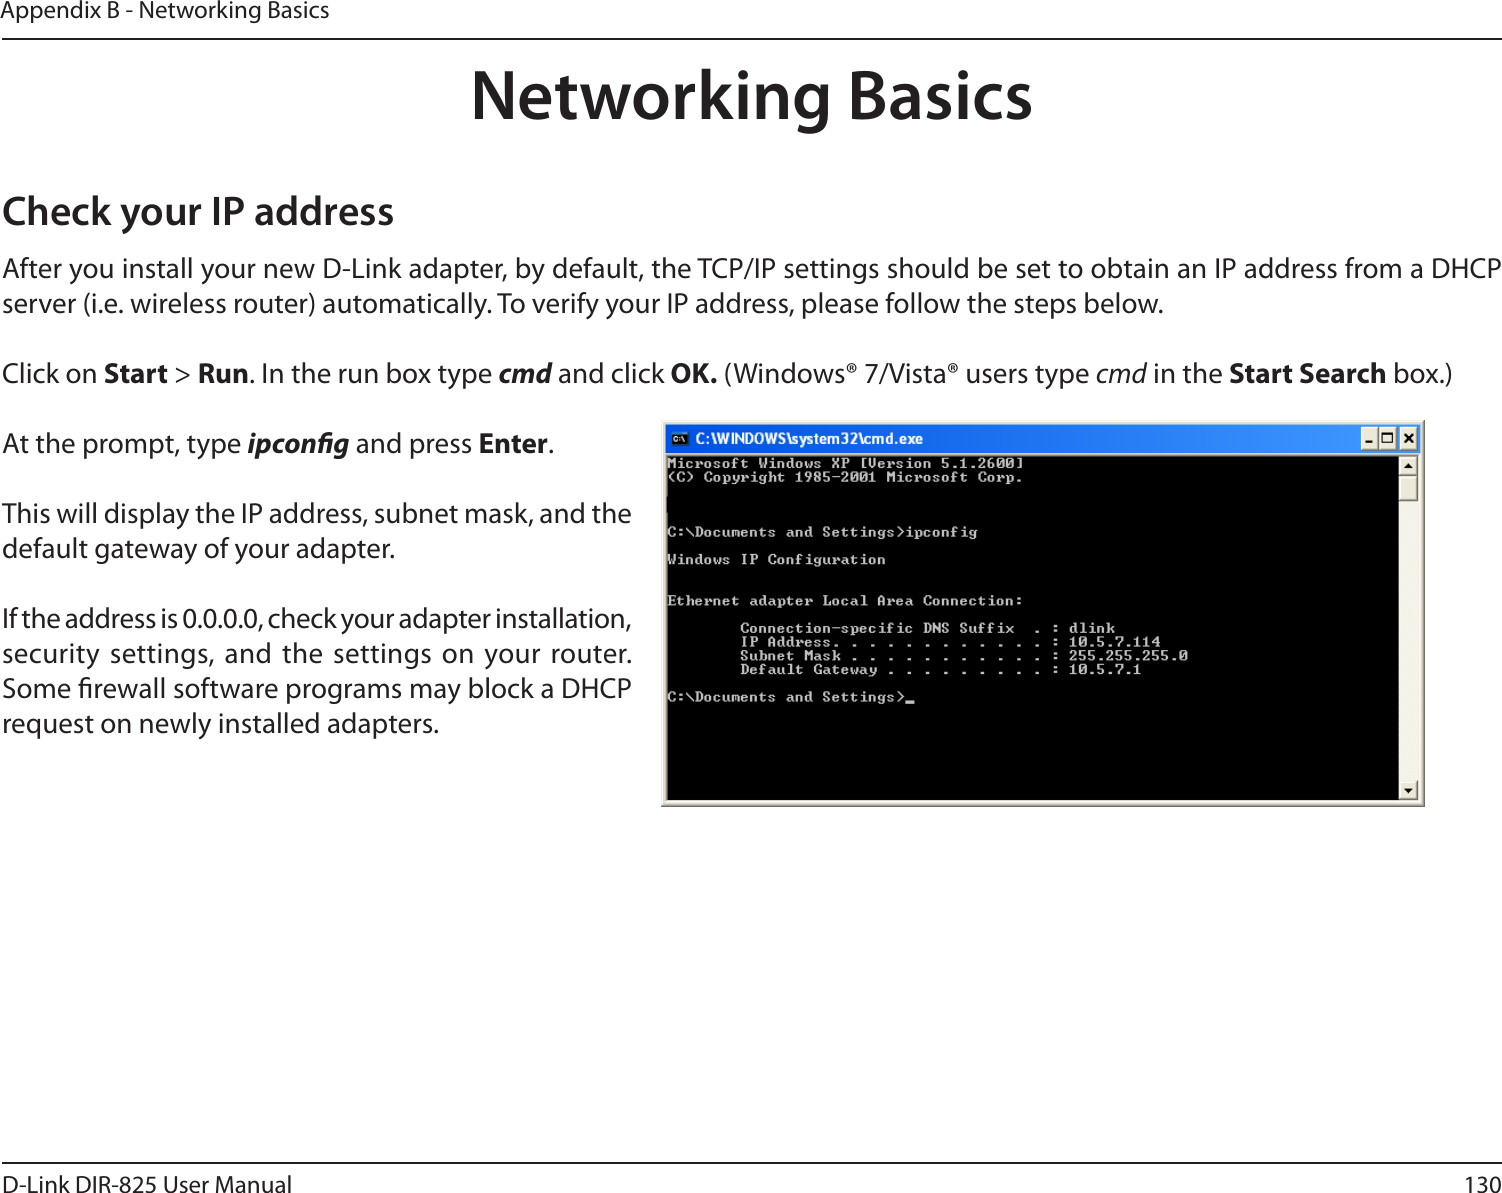 130D-Link DIR-825 User ManualAppendix B - Networking BasicsNetworking BasicsCheck your IP addressAfter you install your new D-Link adapter, by default, the TCP/IP settings should be set to obtain an IP address from a DHCP server (i.e. wireless router) automatically. To verify your IP address, please follow the steps below.Click on Start &gt; Run. In the run box type cmd and click OK. (Windows® 7/Vista® users type cmd in the Start Search box.)At the prompt, type ipcong and press Enter.This will display the IP address, subnet mask, and the default gateway of your adapter.If the address is 0.0.0.0, check your adapter installation, security  settings, and  the settings on your router. Some rewall software programs may block a DHCP request on newly installed adapters. 